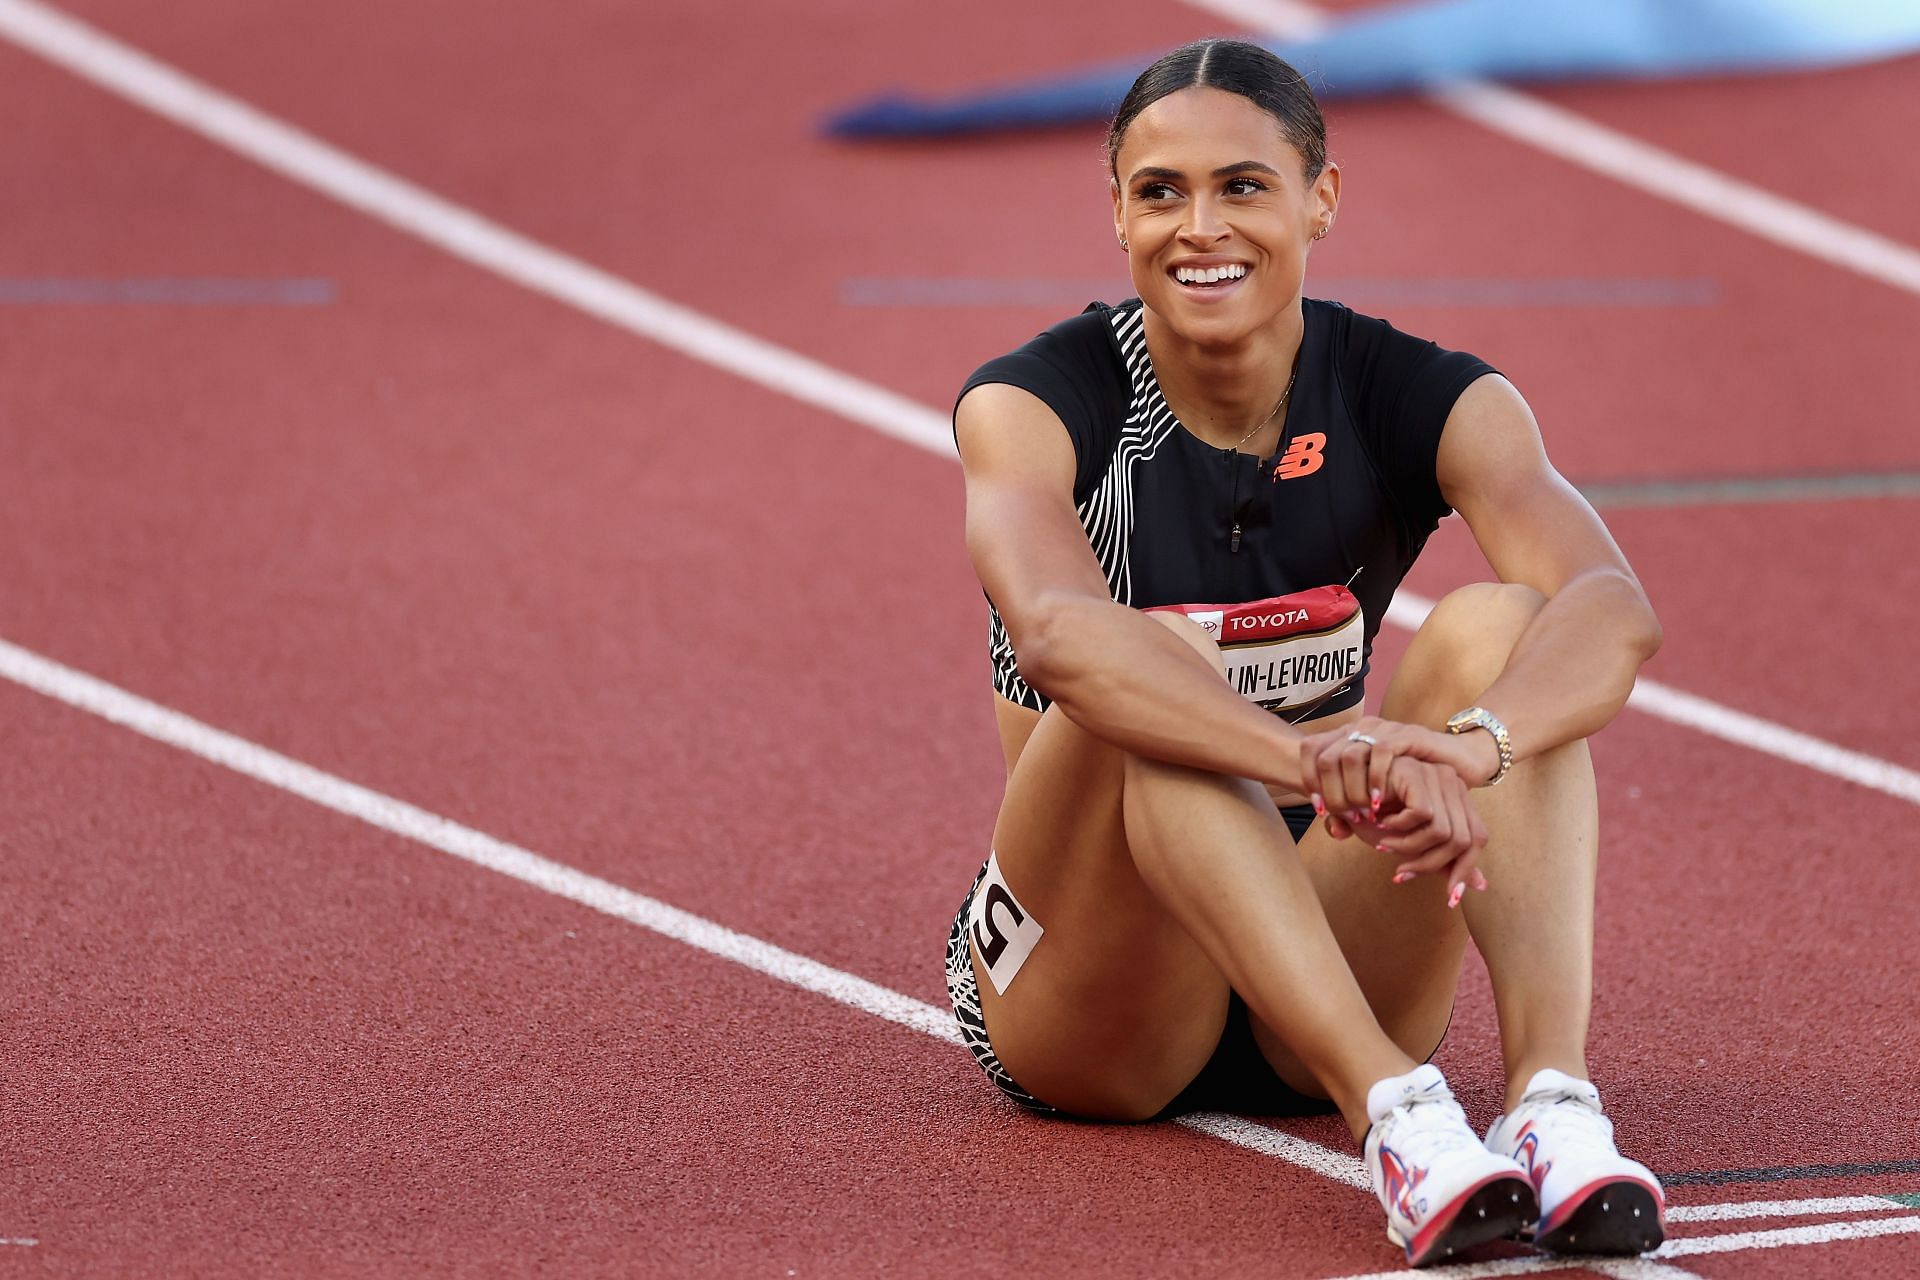 Sydney McLaughlin-Levrone reacts after winning the Women&#039;s 400m Final during the 2023 USATF Outdoor Championships.